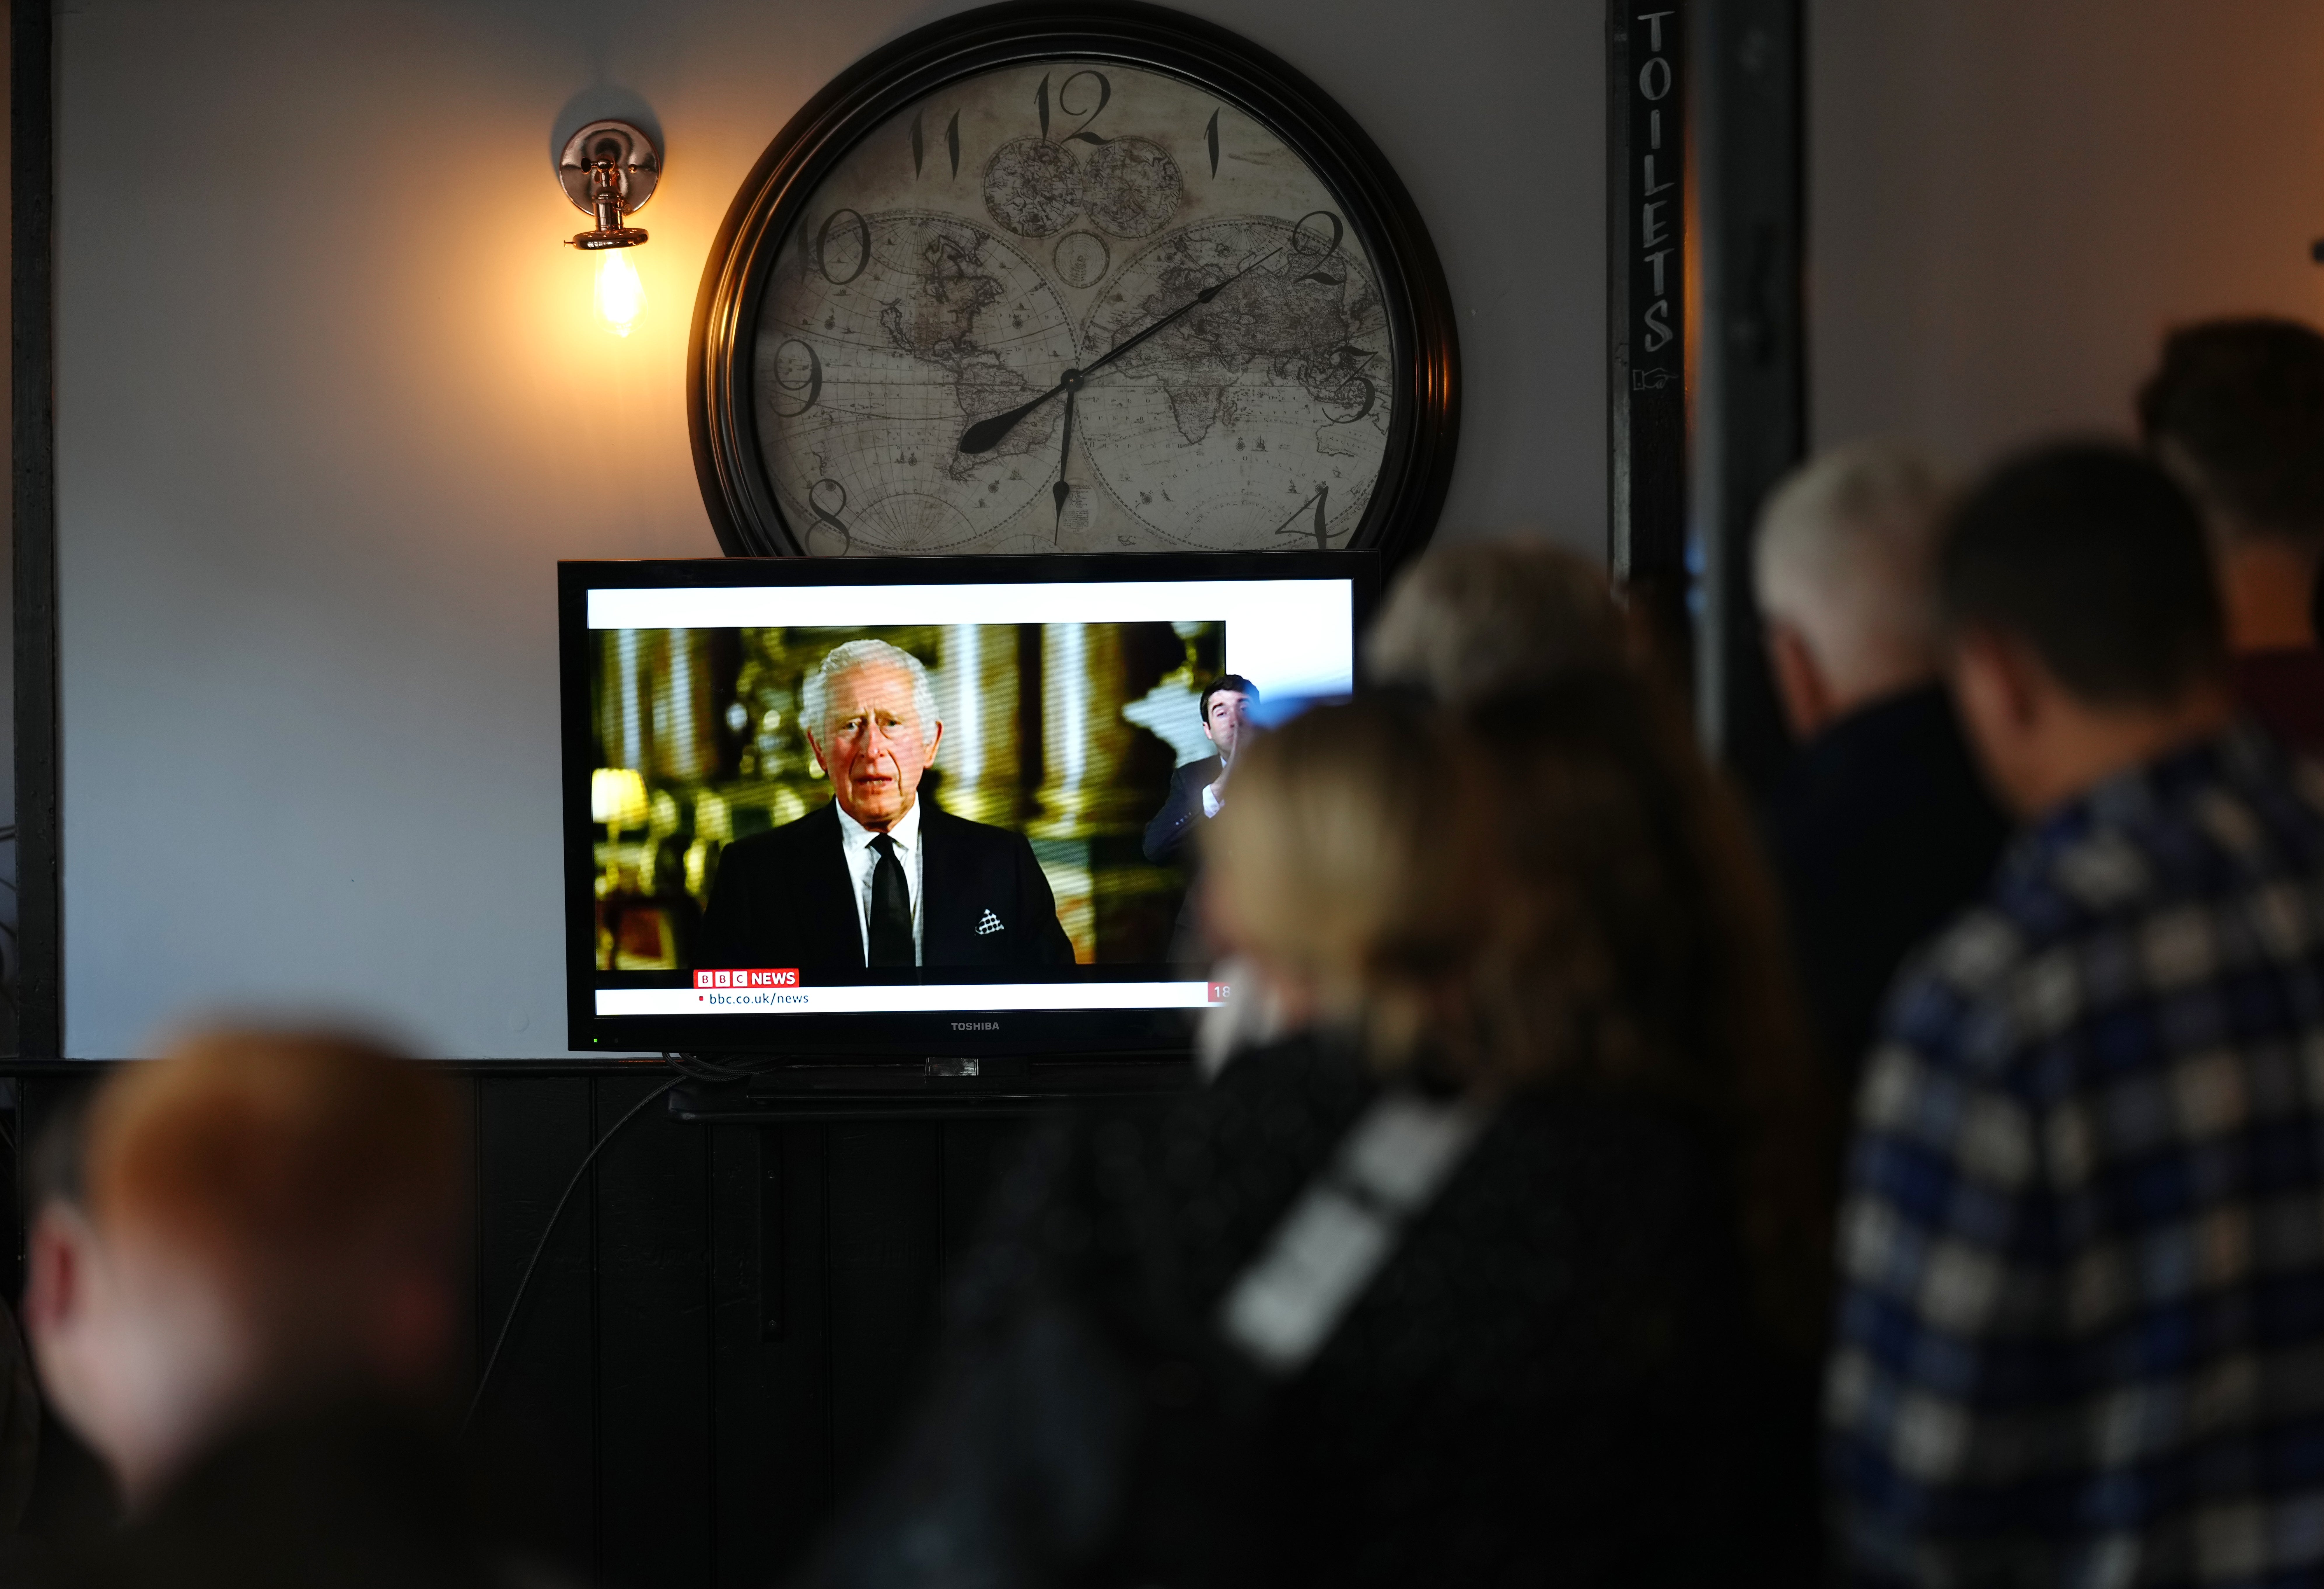 Members of the public in The Prince Harry Pub, Windsor, watching a broadcast of King Charles III (John Walton/PA)